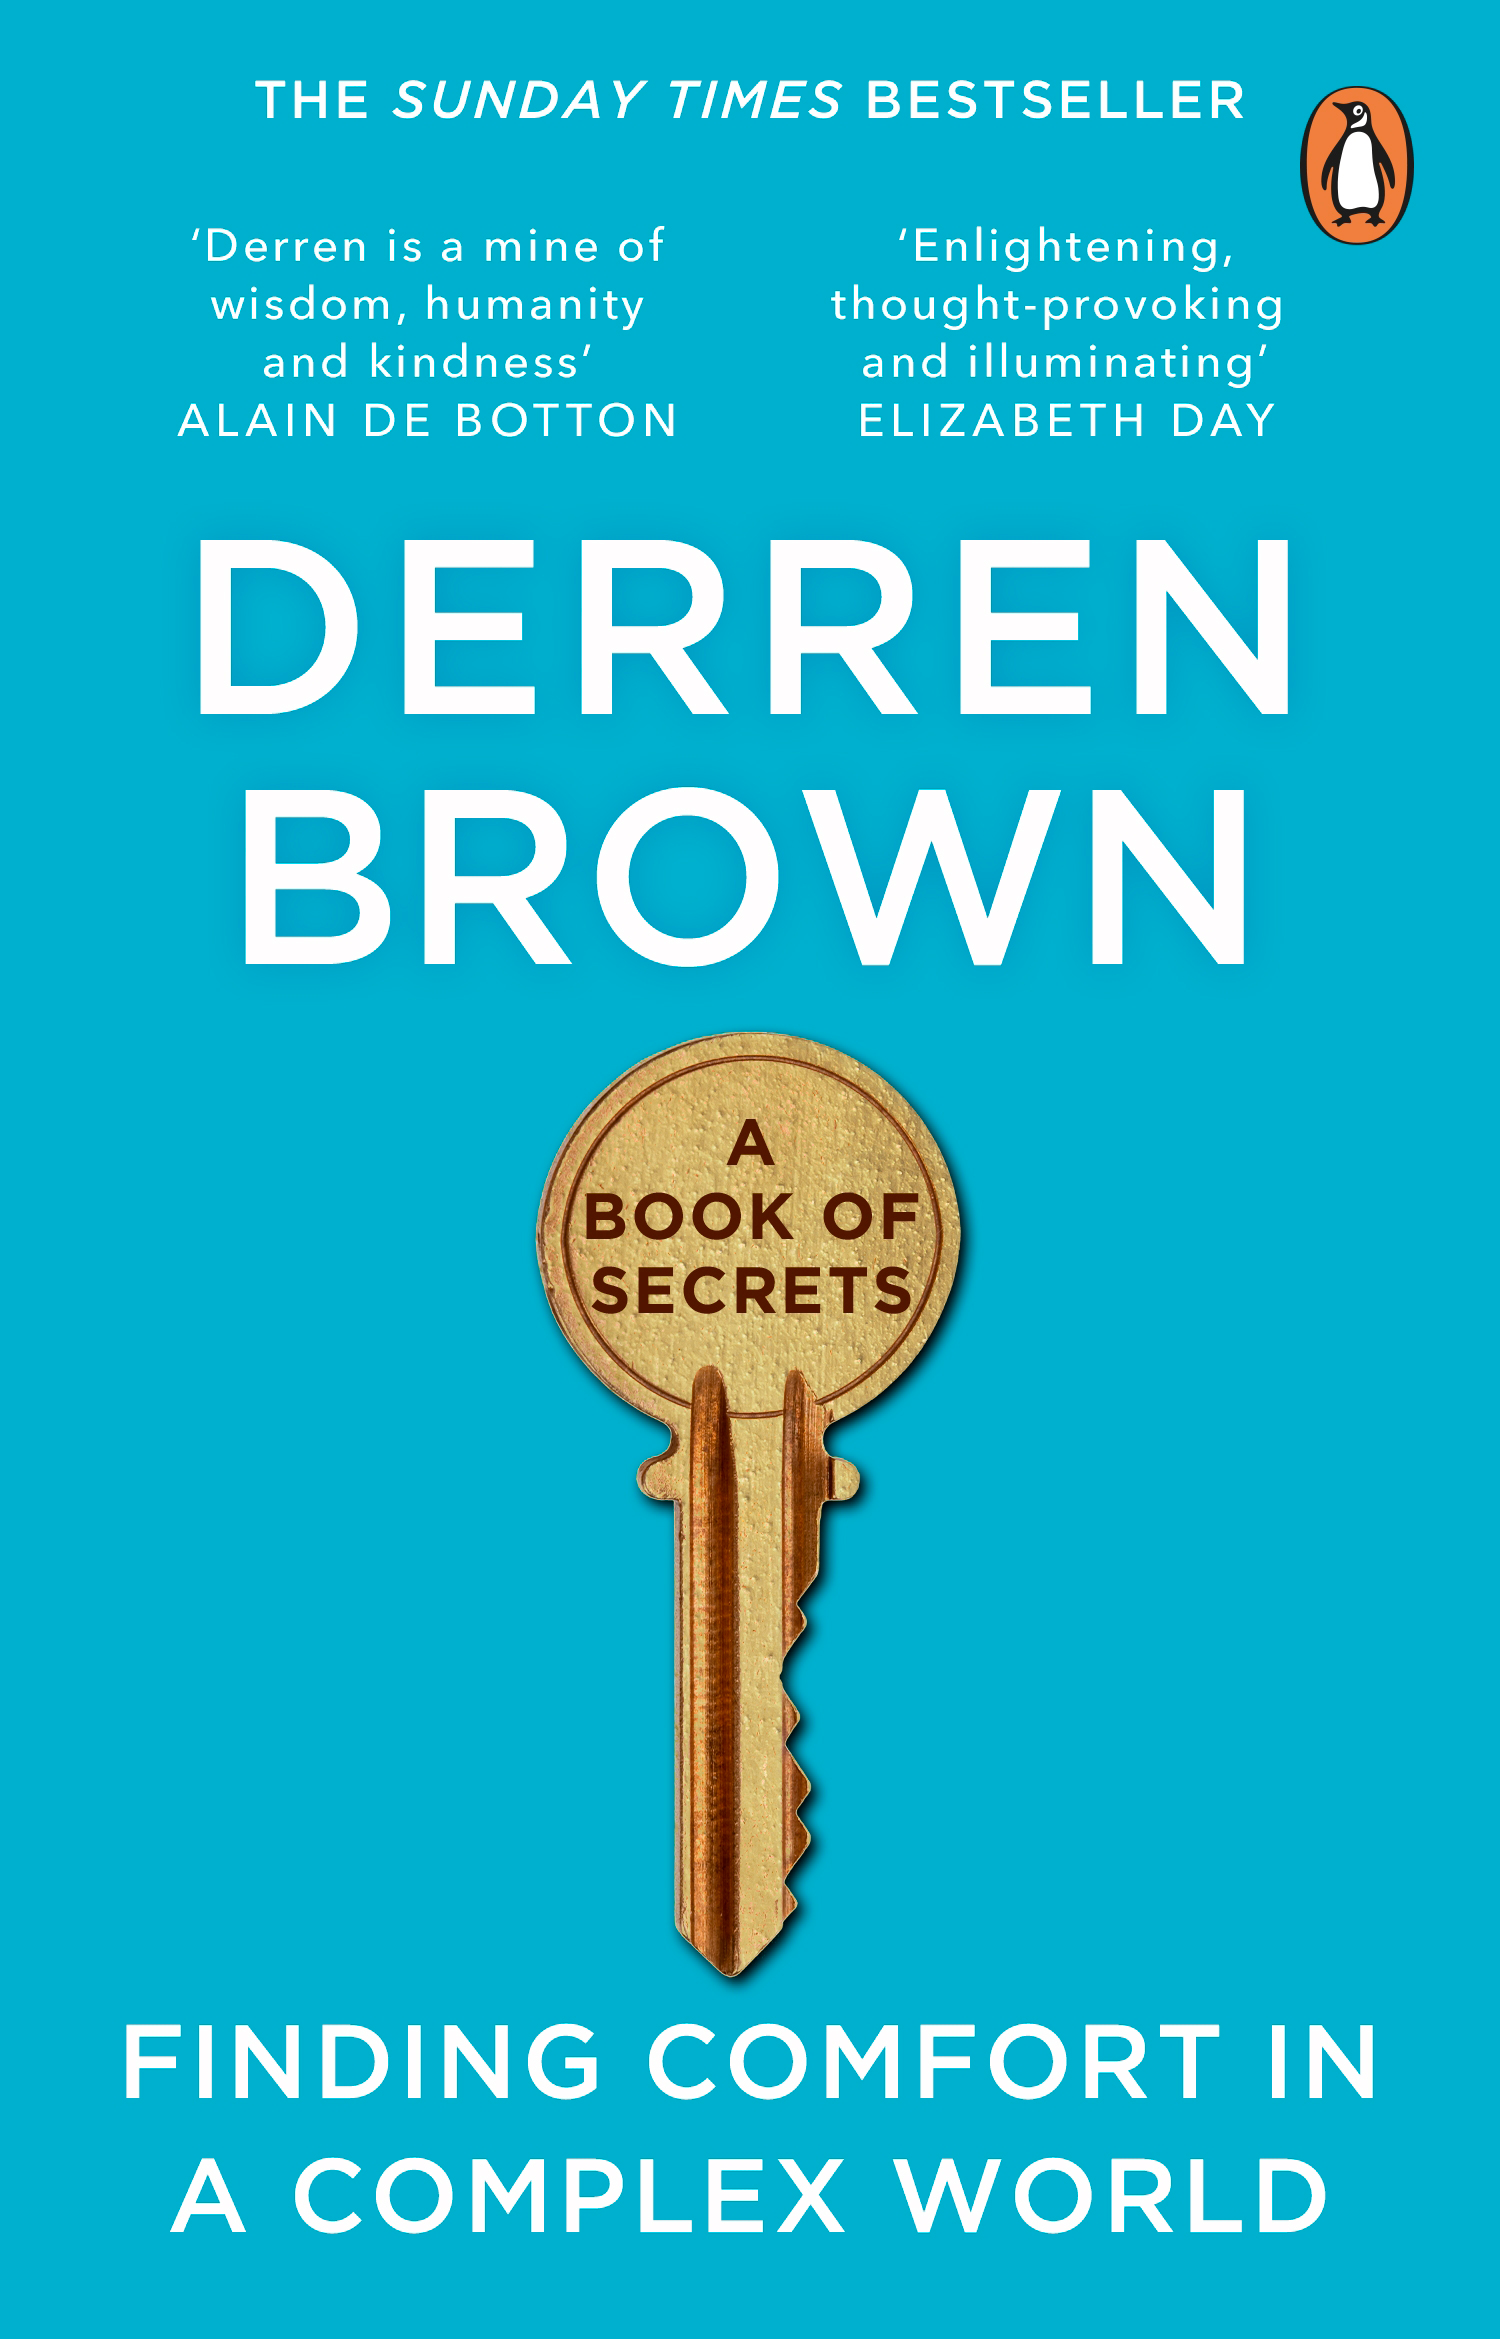 ‘A Book of Secrets’ by Derren Brown | Out now in paperback